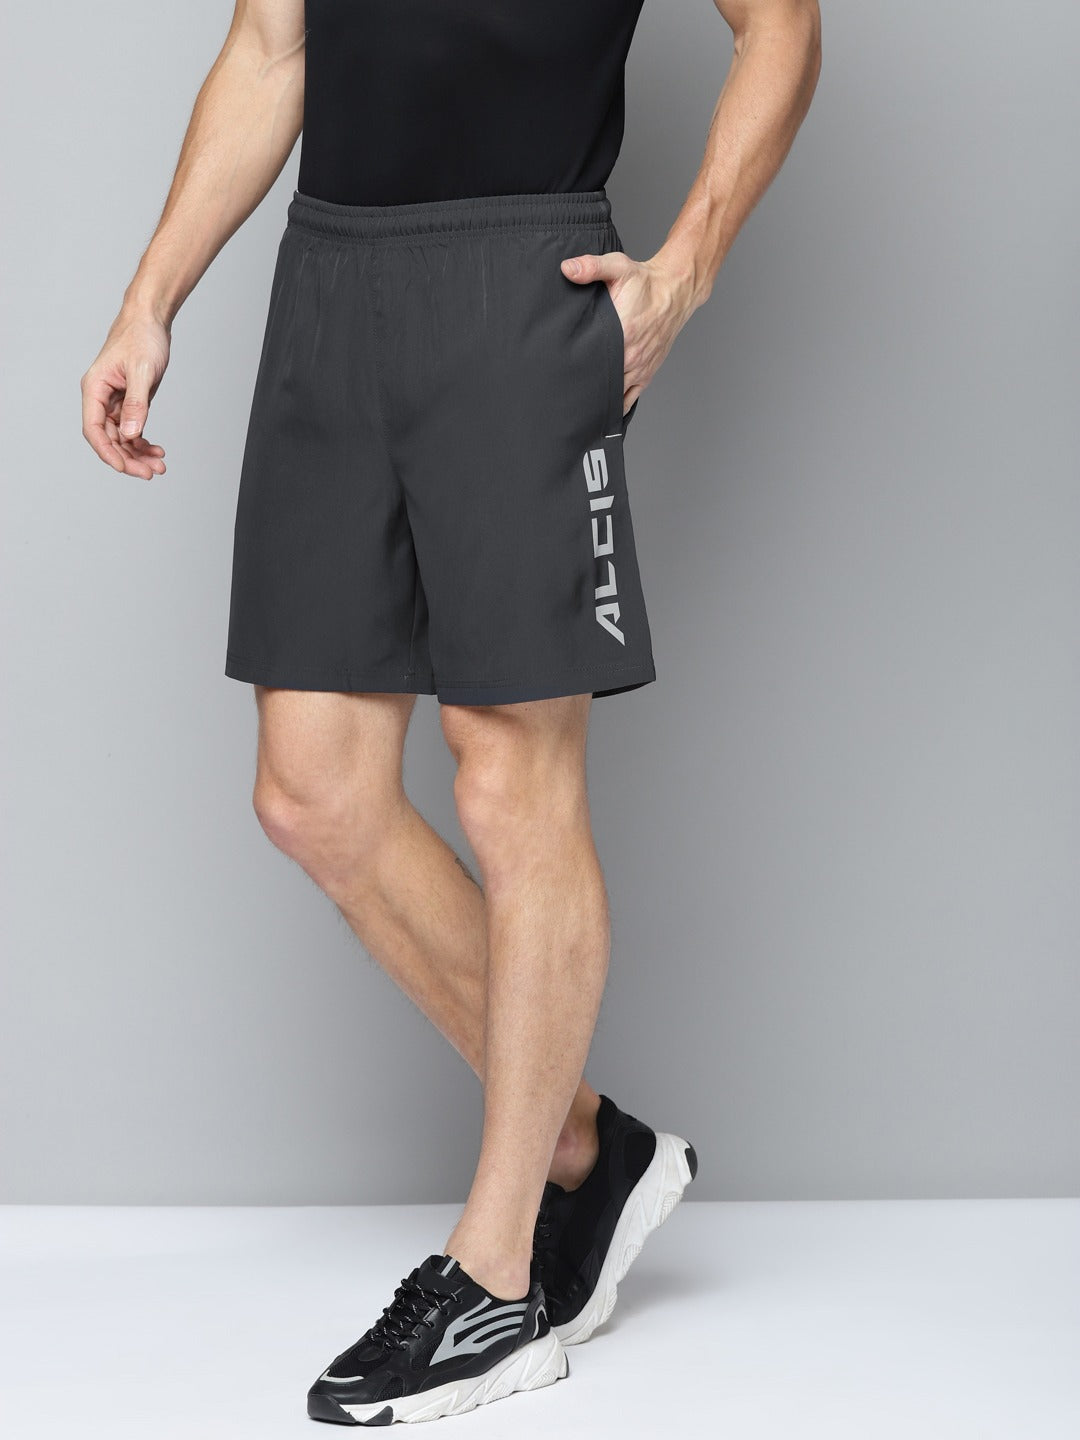 ALCIS Men Charcoal Grey Solid Slim Fit Running Sports Shorts